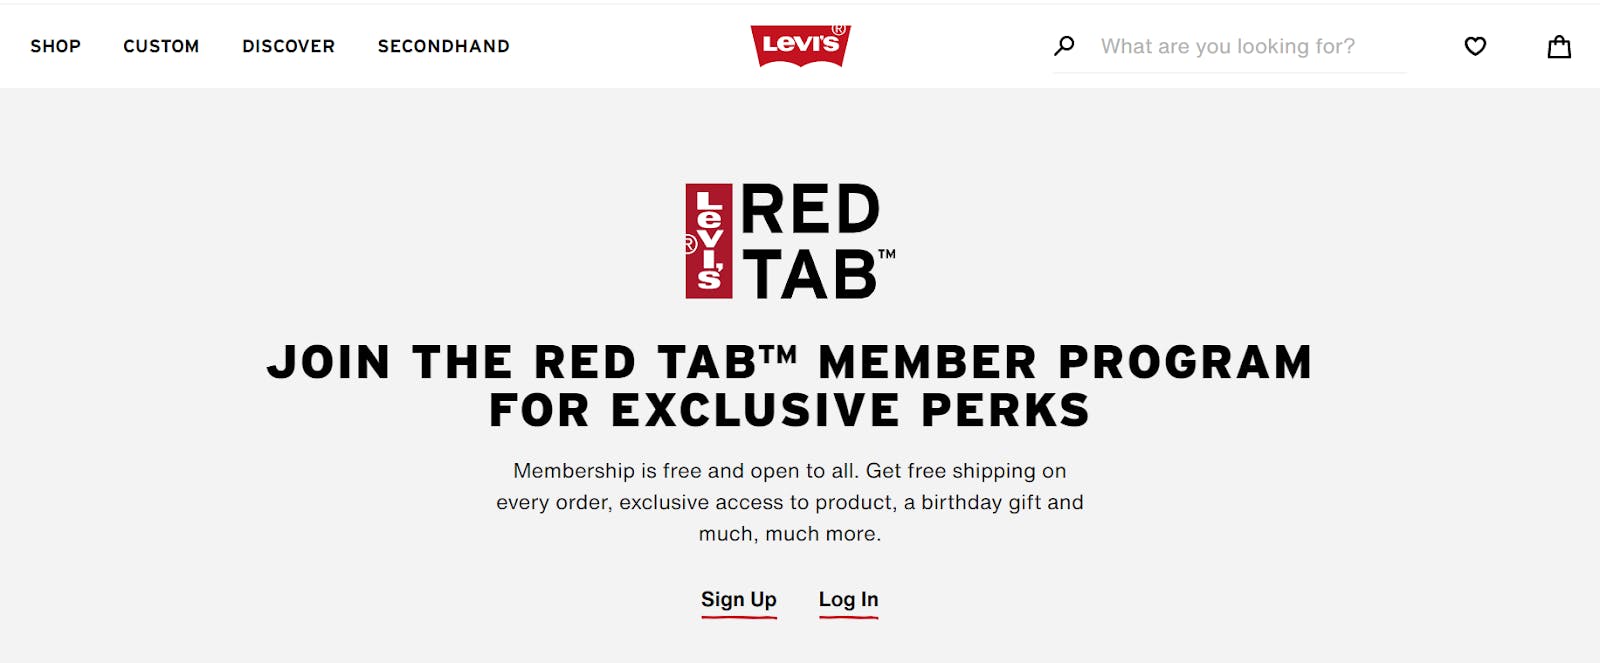 The Levi's membership signup page.